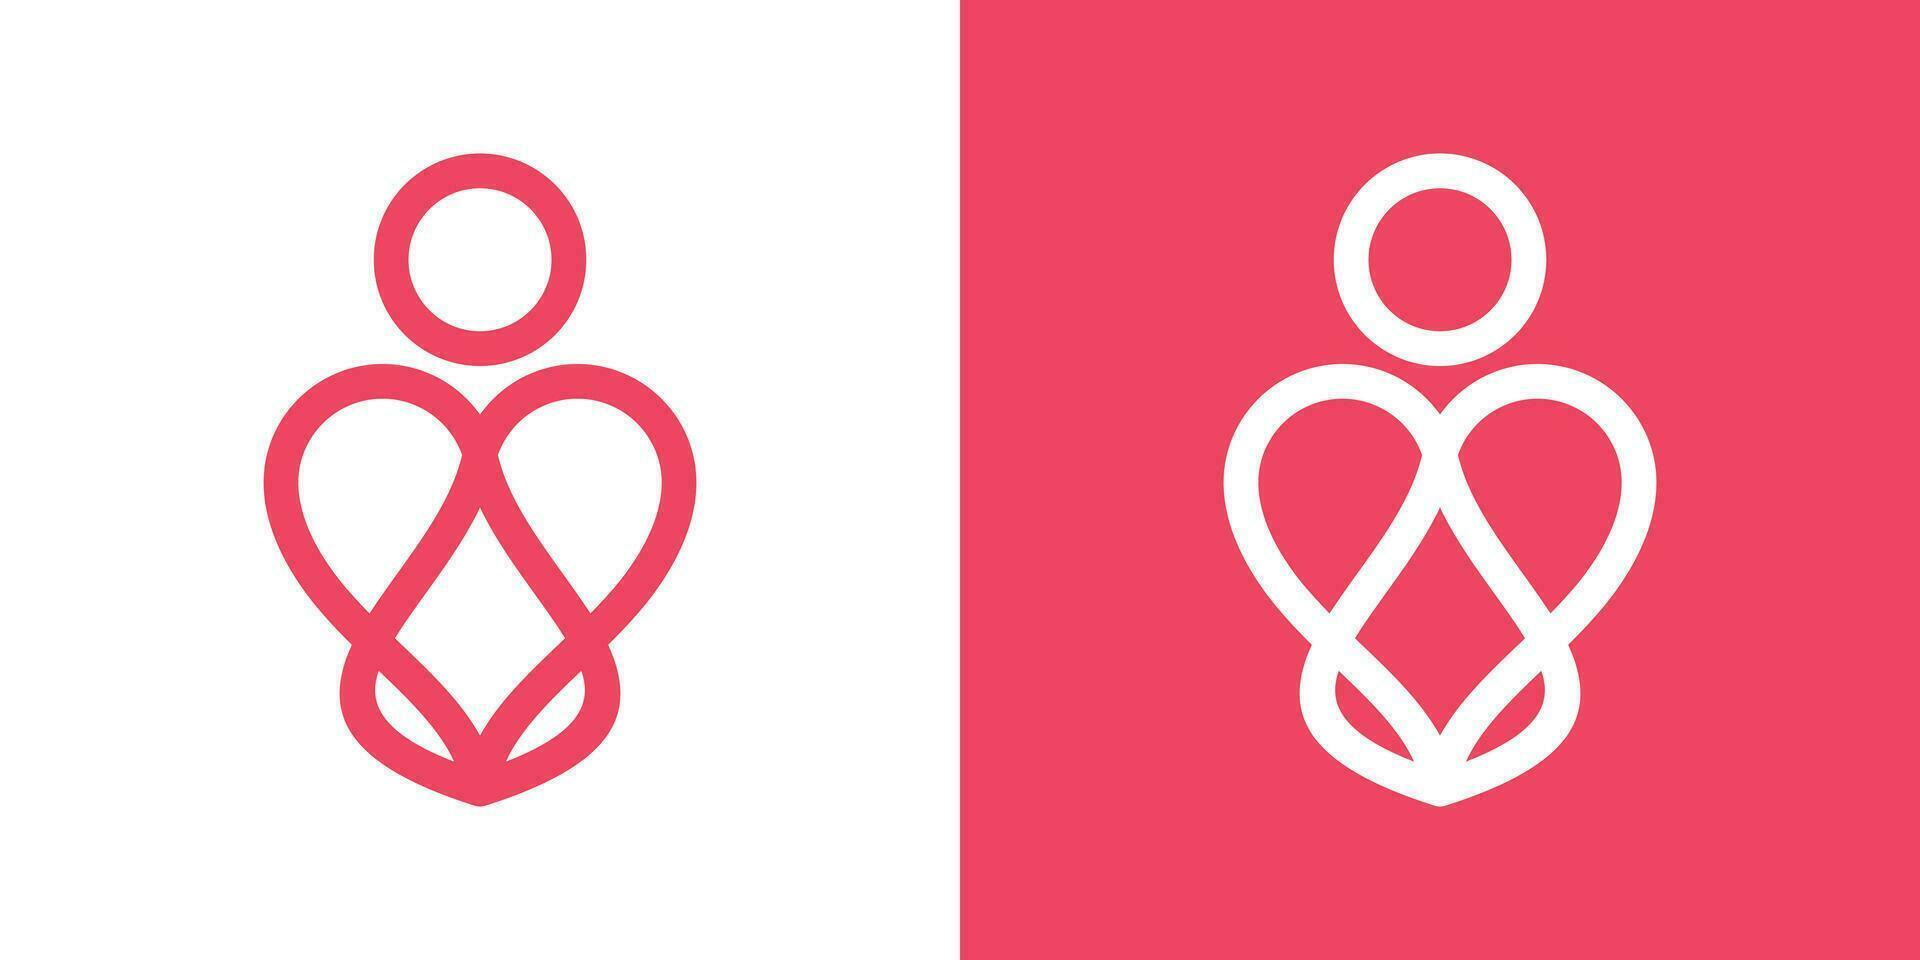 logo design elements of people combined with hearts, inspirational vector icon